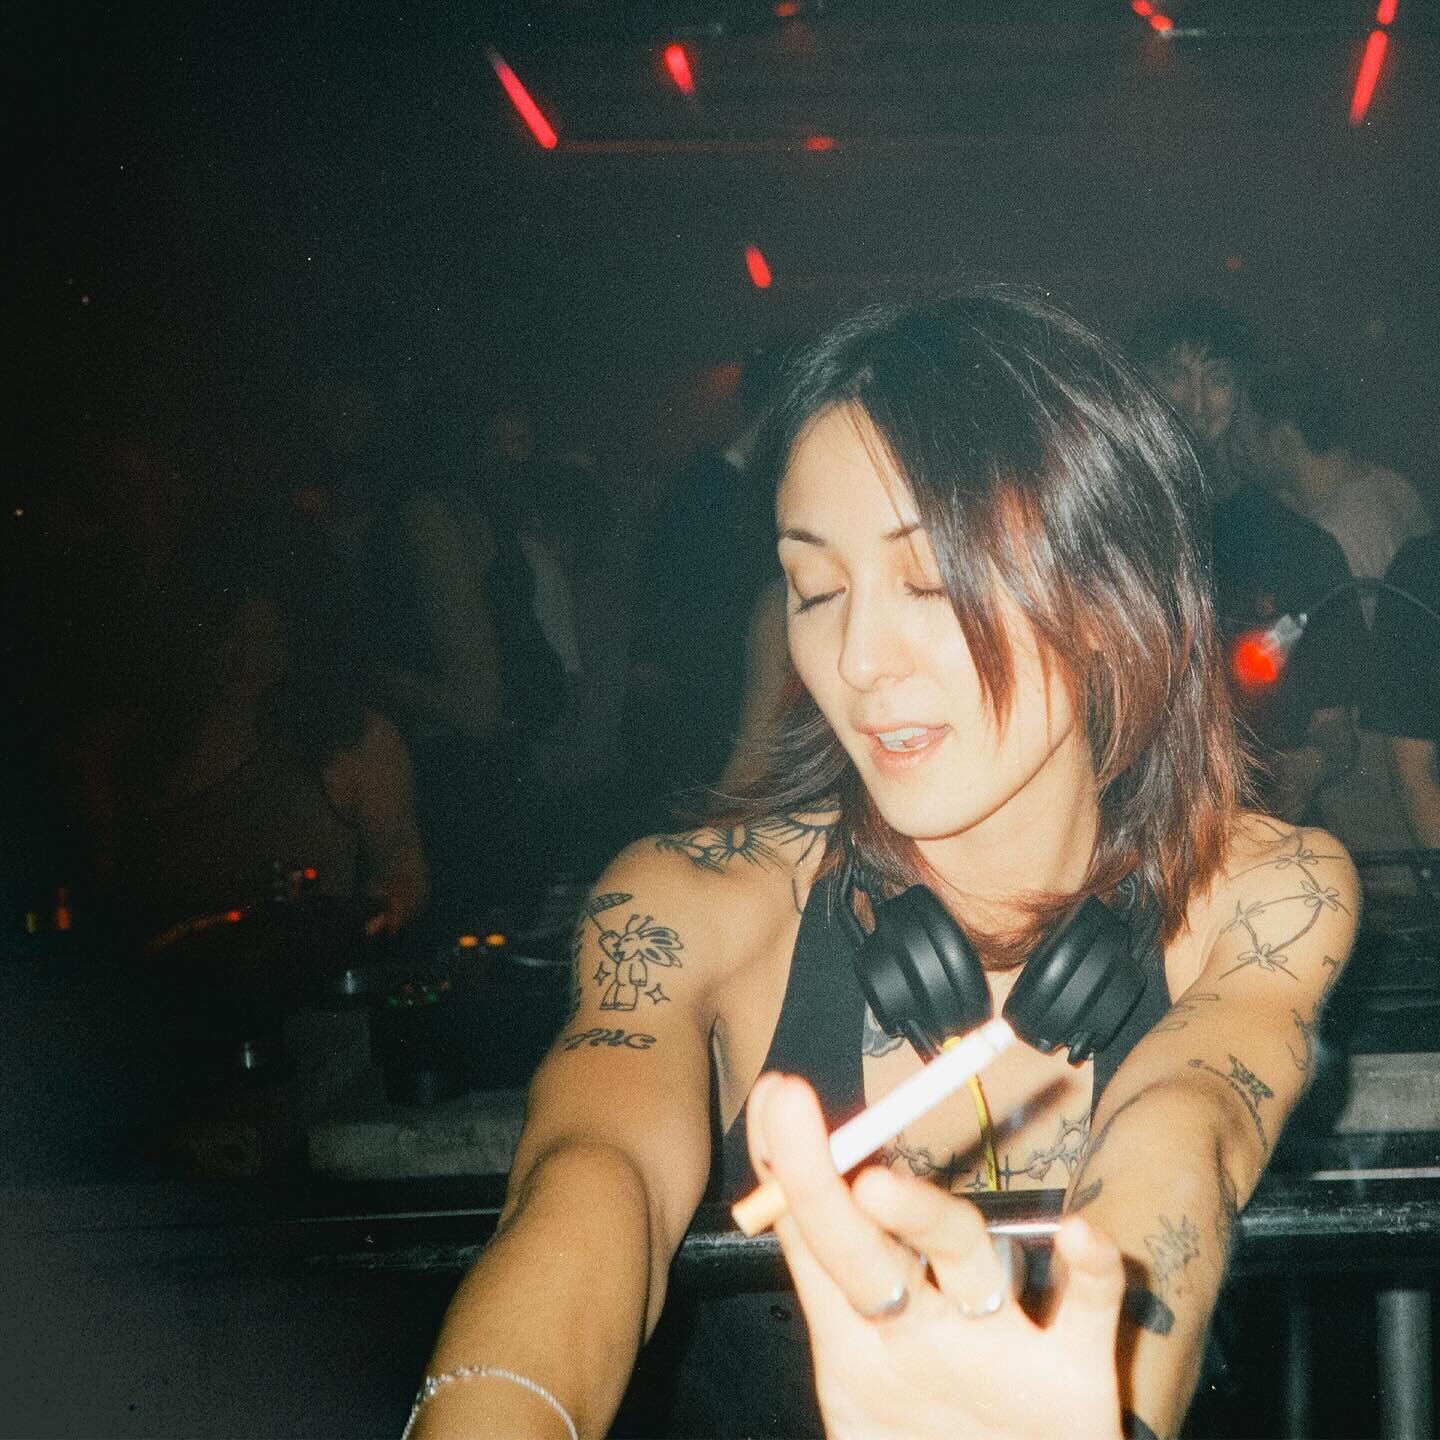 POING CLOSING WEEKENDER ✨

captured some final moments at @poing_club on film 🎞️